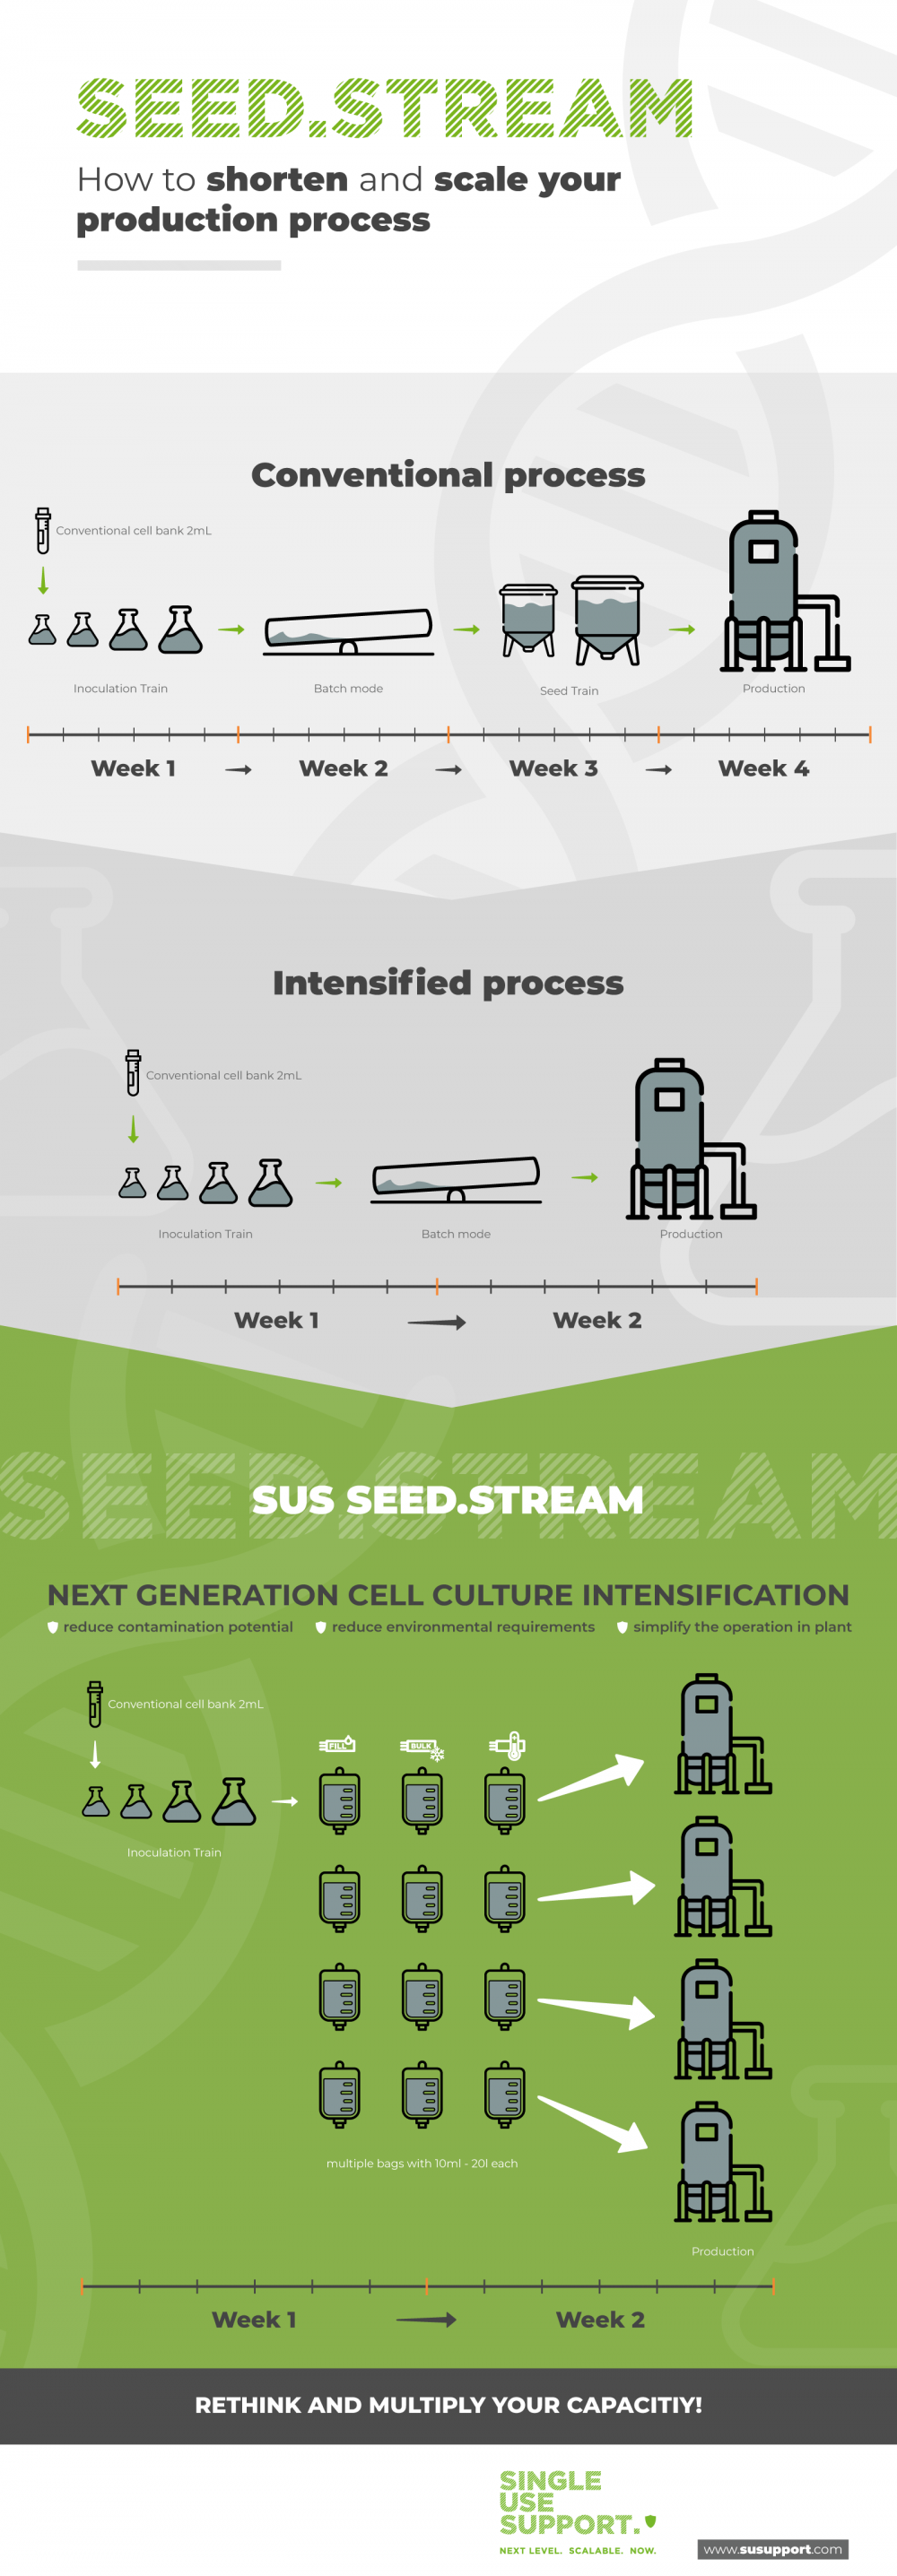 seed-train-intensification-single-use-support